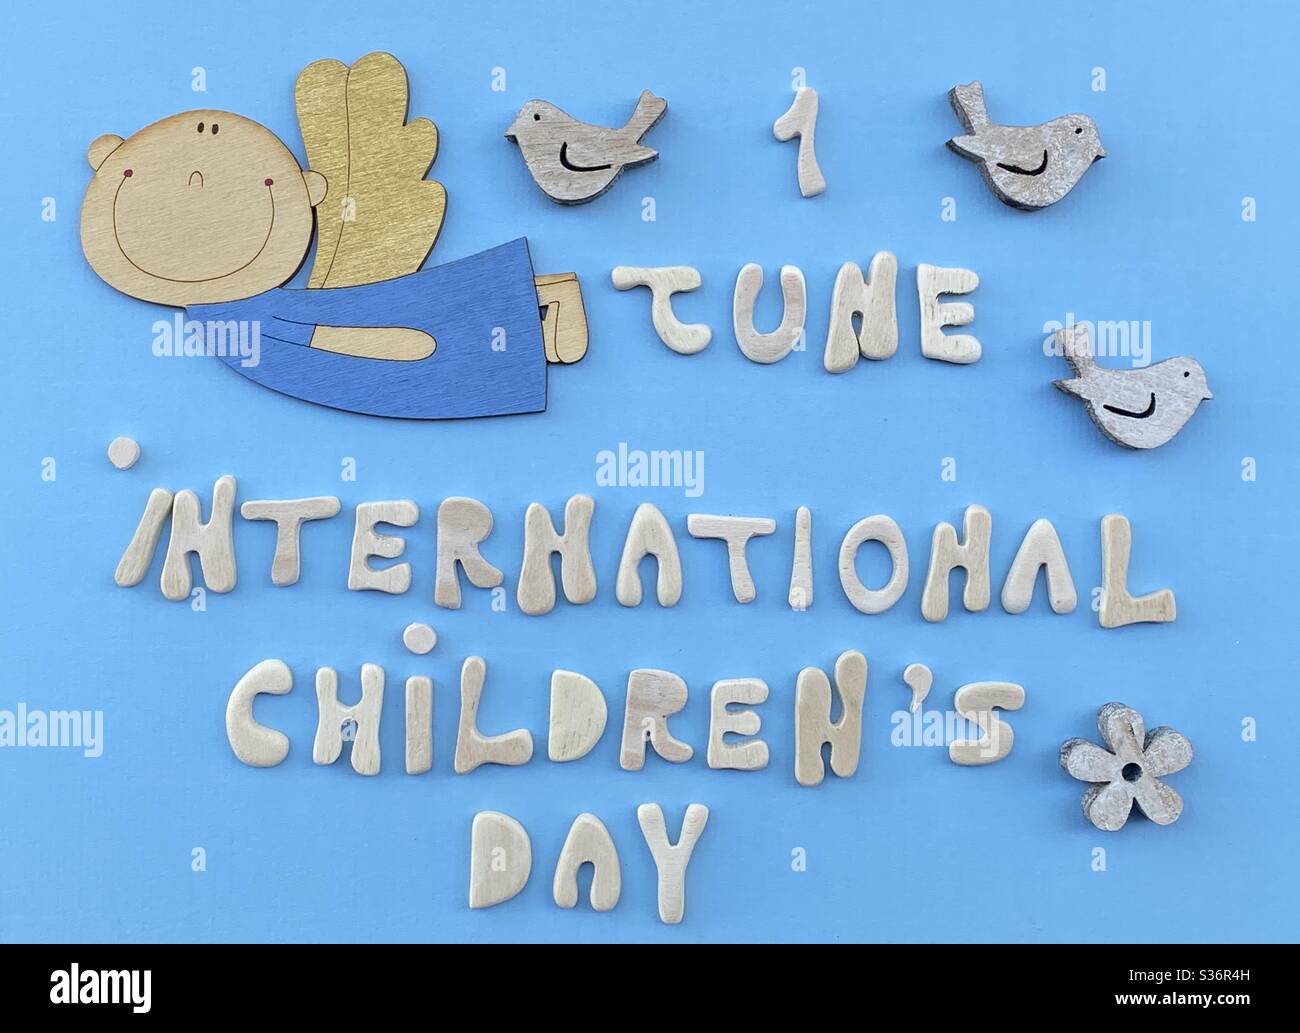 1 june, international childrens day background for a greeting card. kids day poster with wooden handmade letters and objects Stock Photo